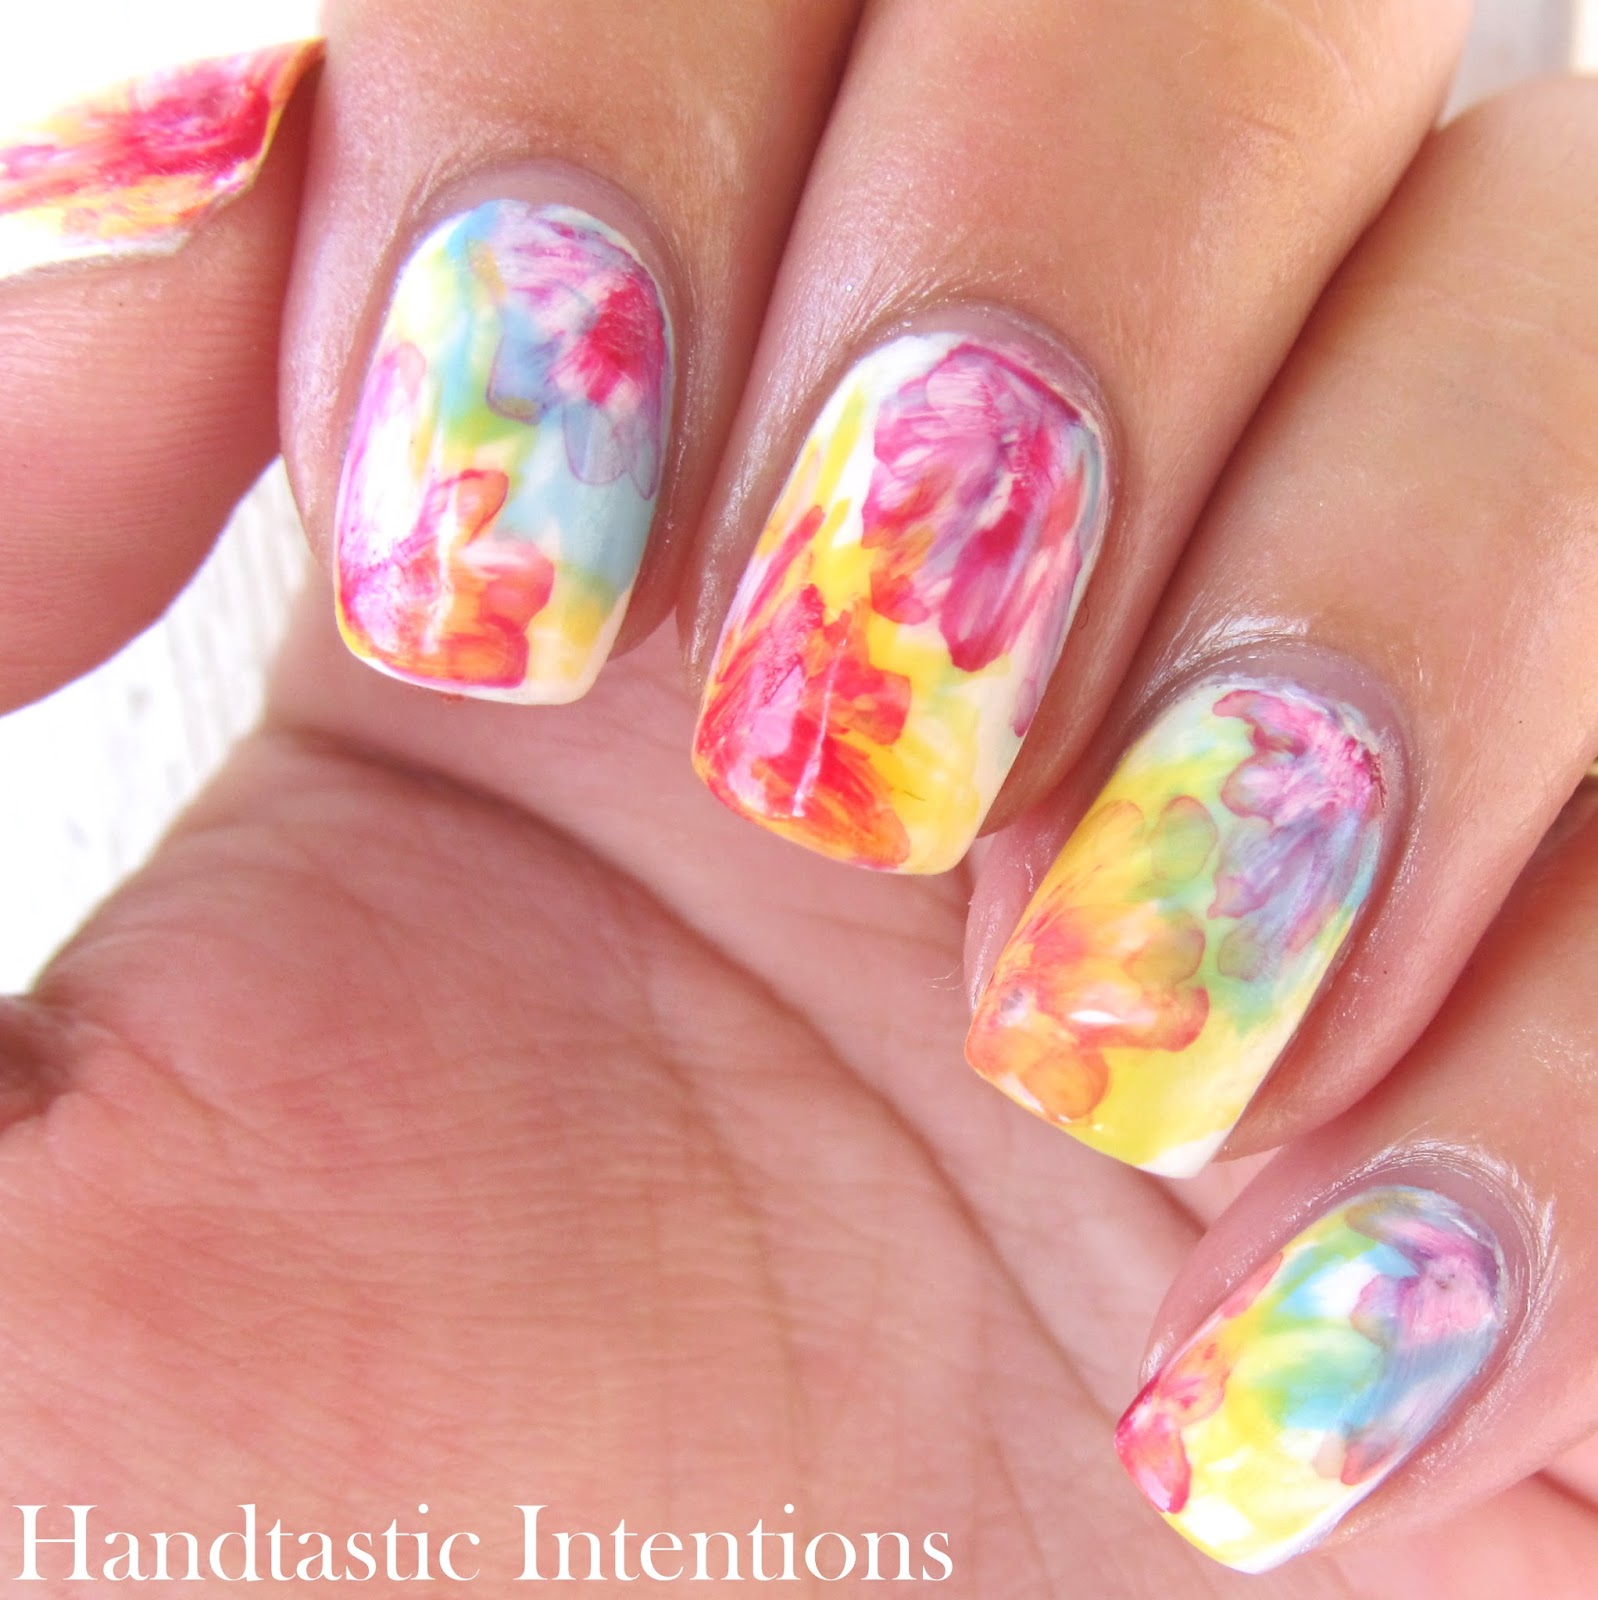 Handtastic Intentions Nail Art Watercolor Flowers Tri Polish Tuesday